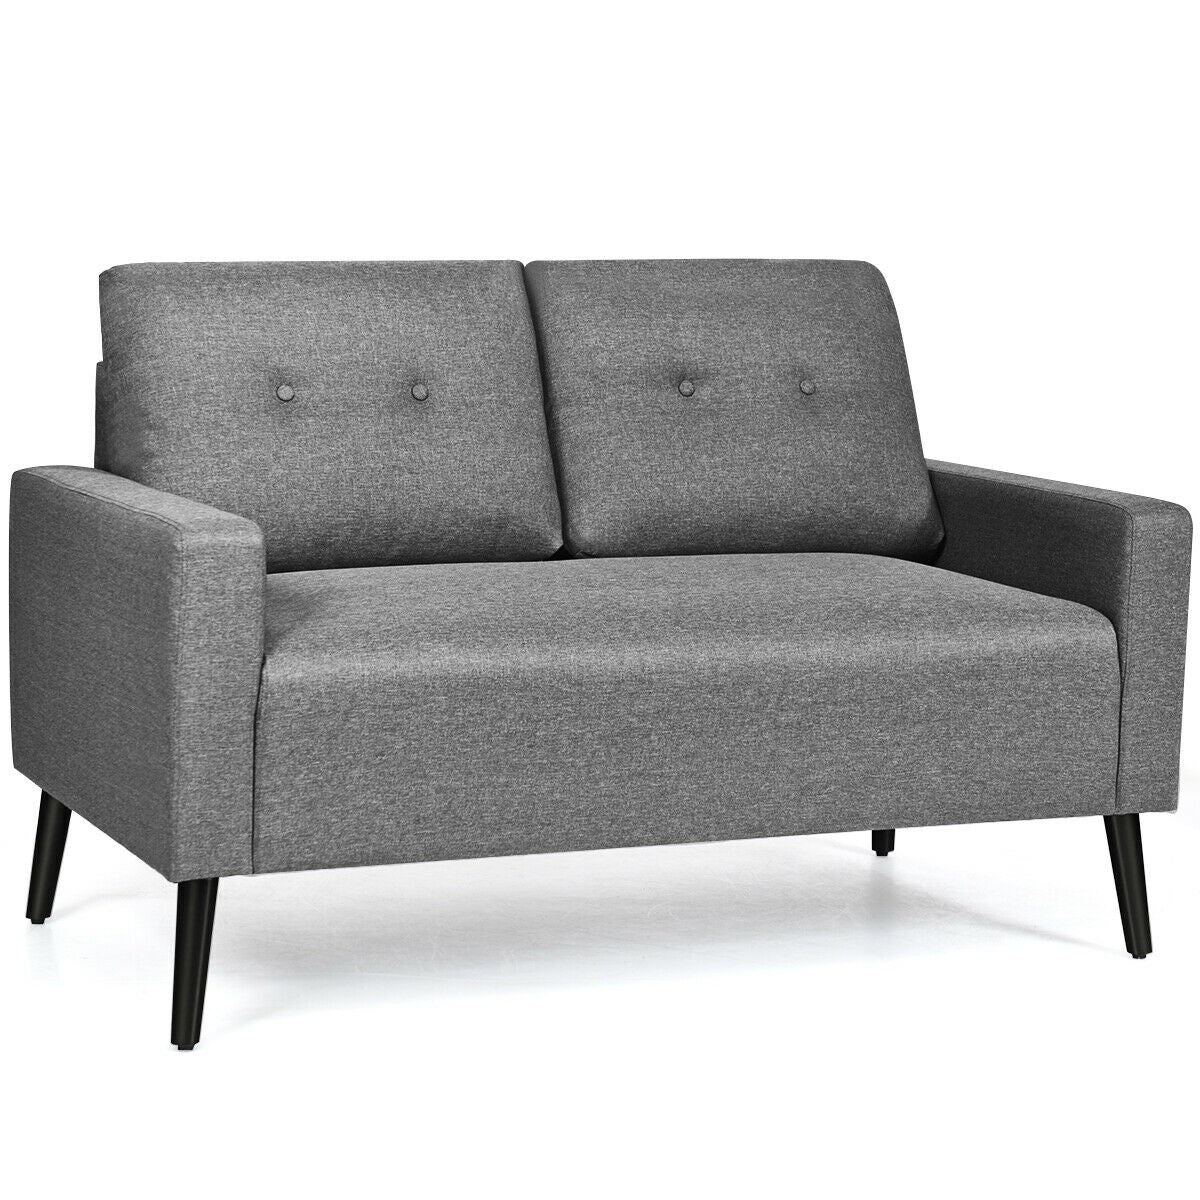 Giantex Modern Loveseat Sofa, 55" Upholstered Sofa Couch w/ Soft Cushion, Rubber Wooden Legs (Gray)